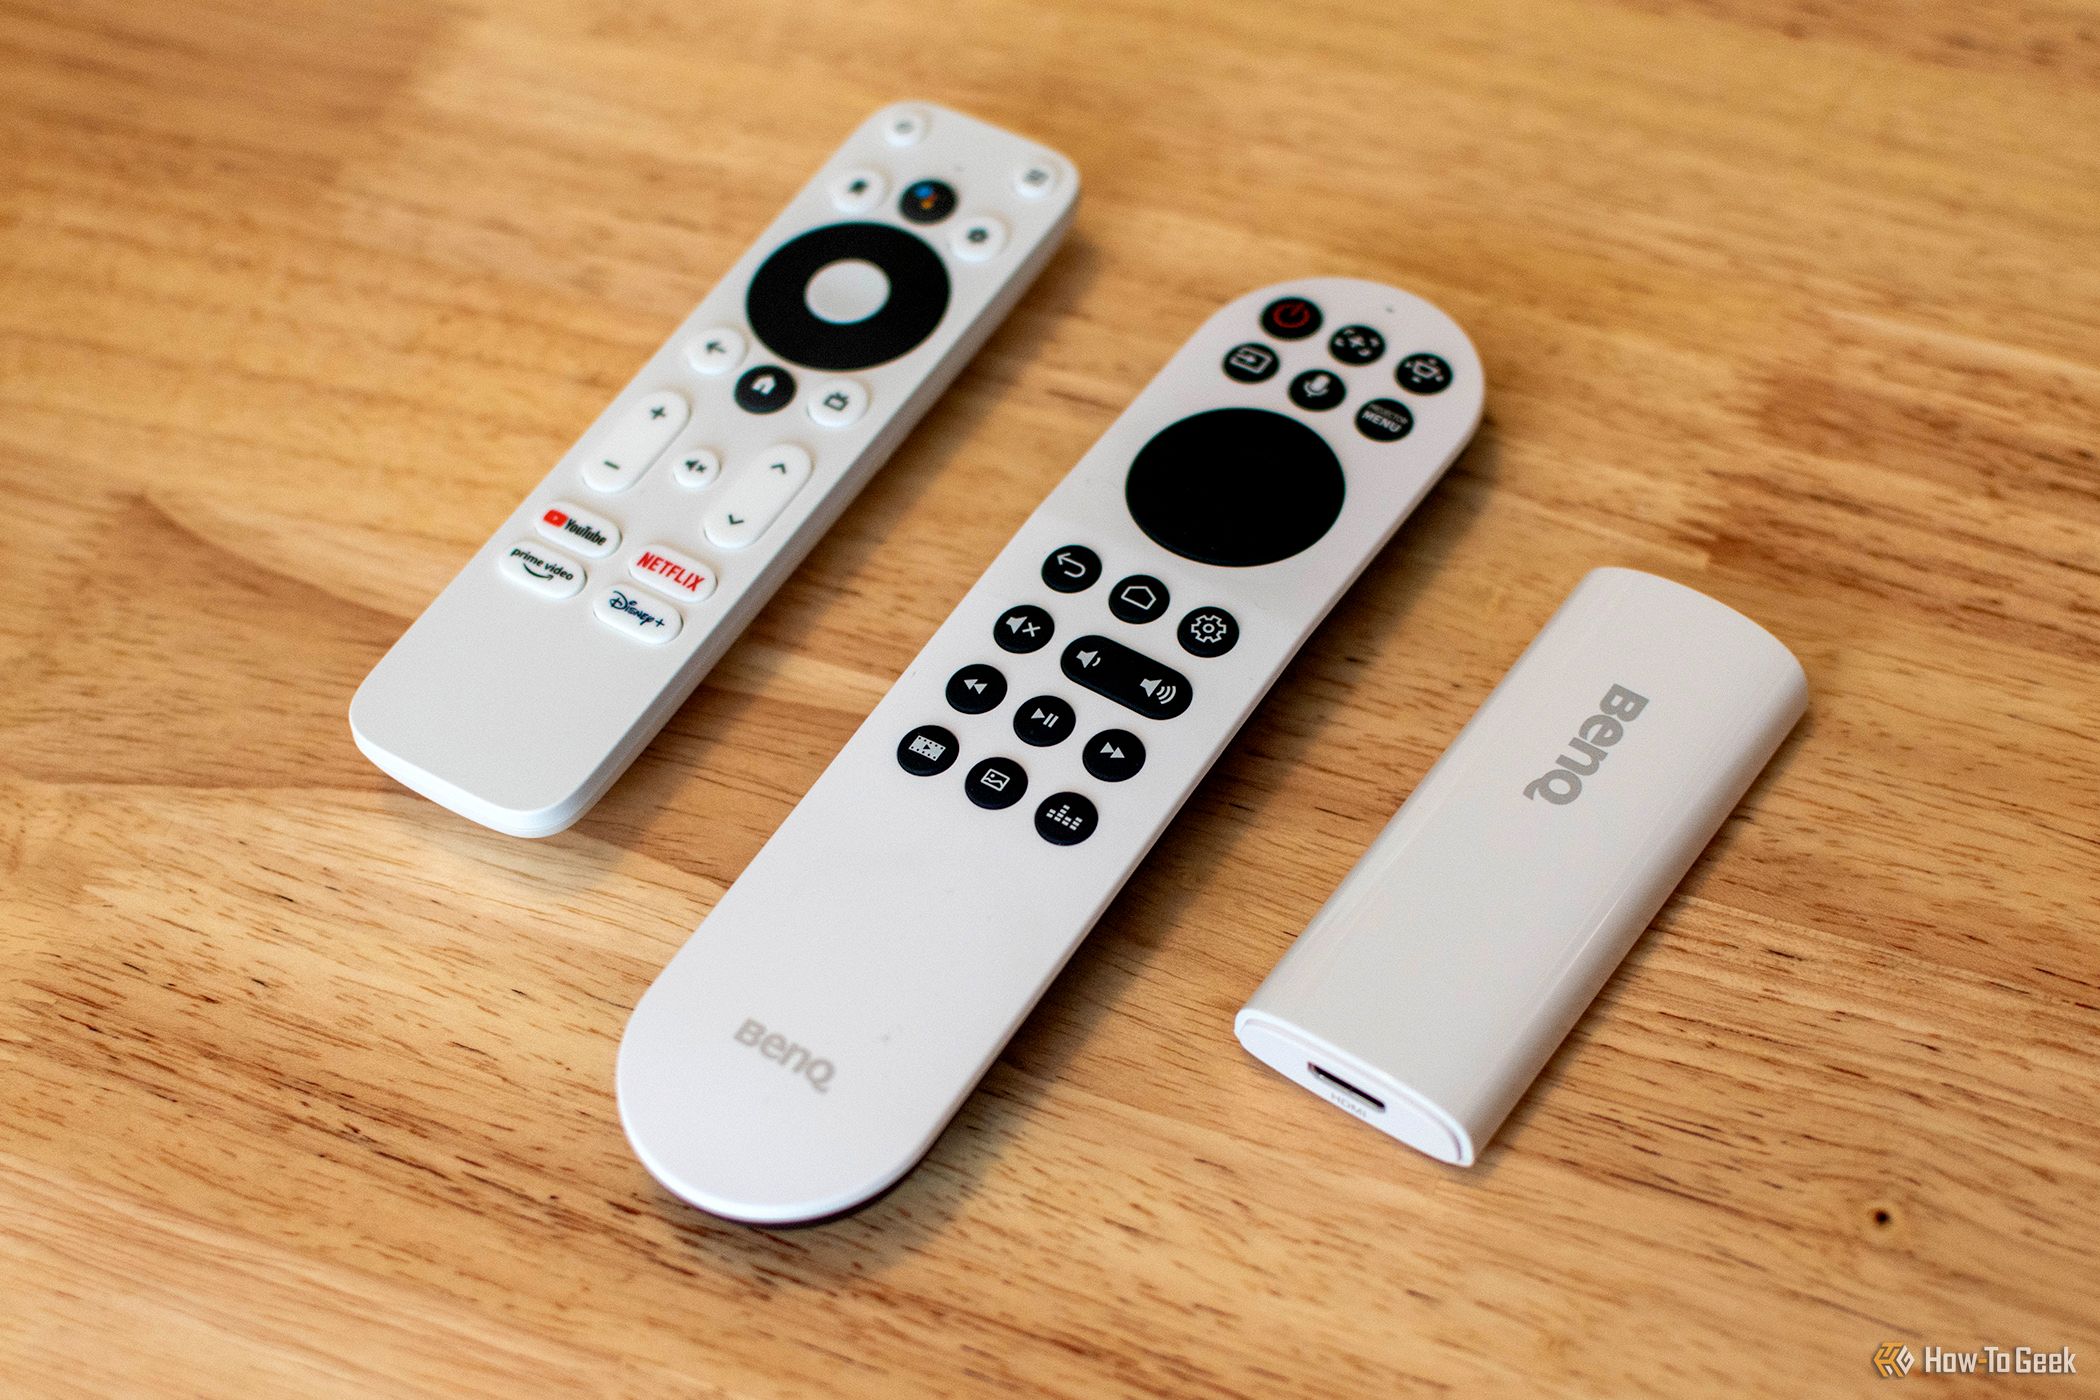 The BenQ X500i Projector's remote control, Android TV dongle, and Android TV remote.